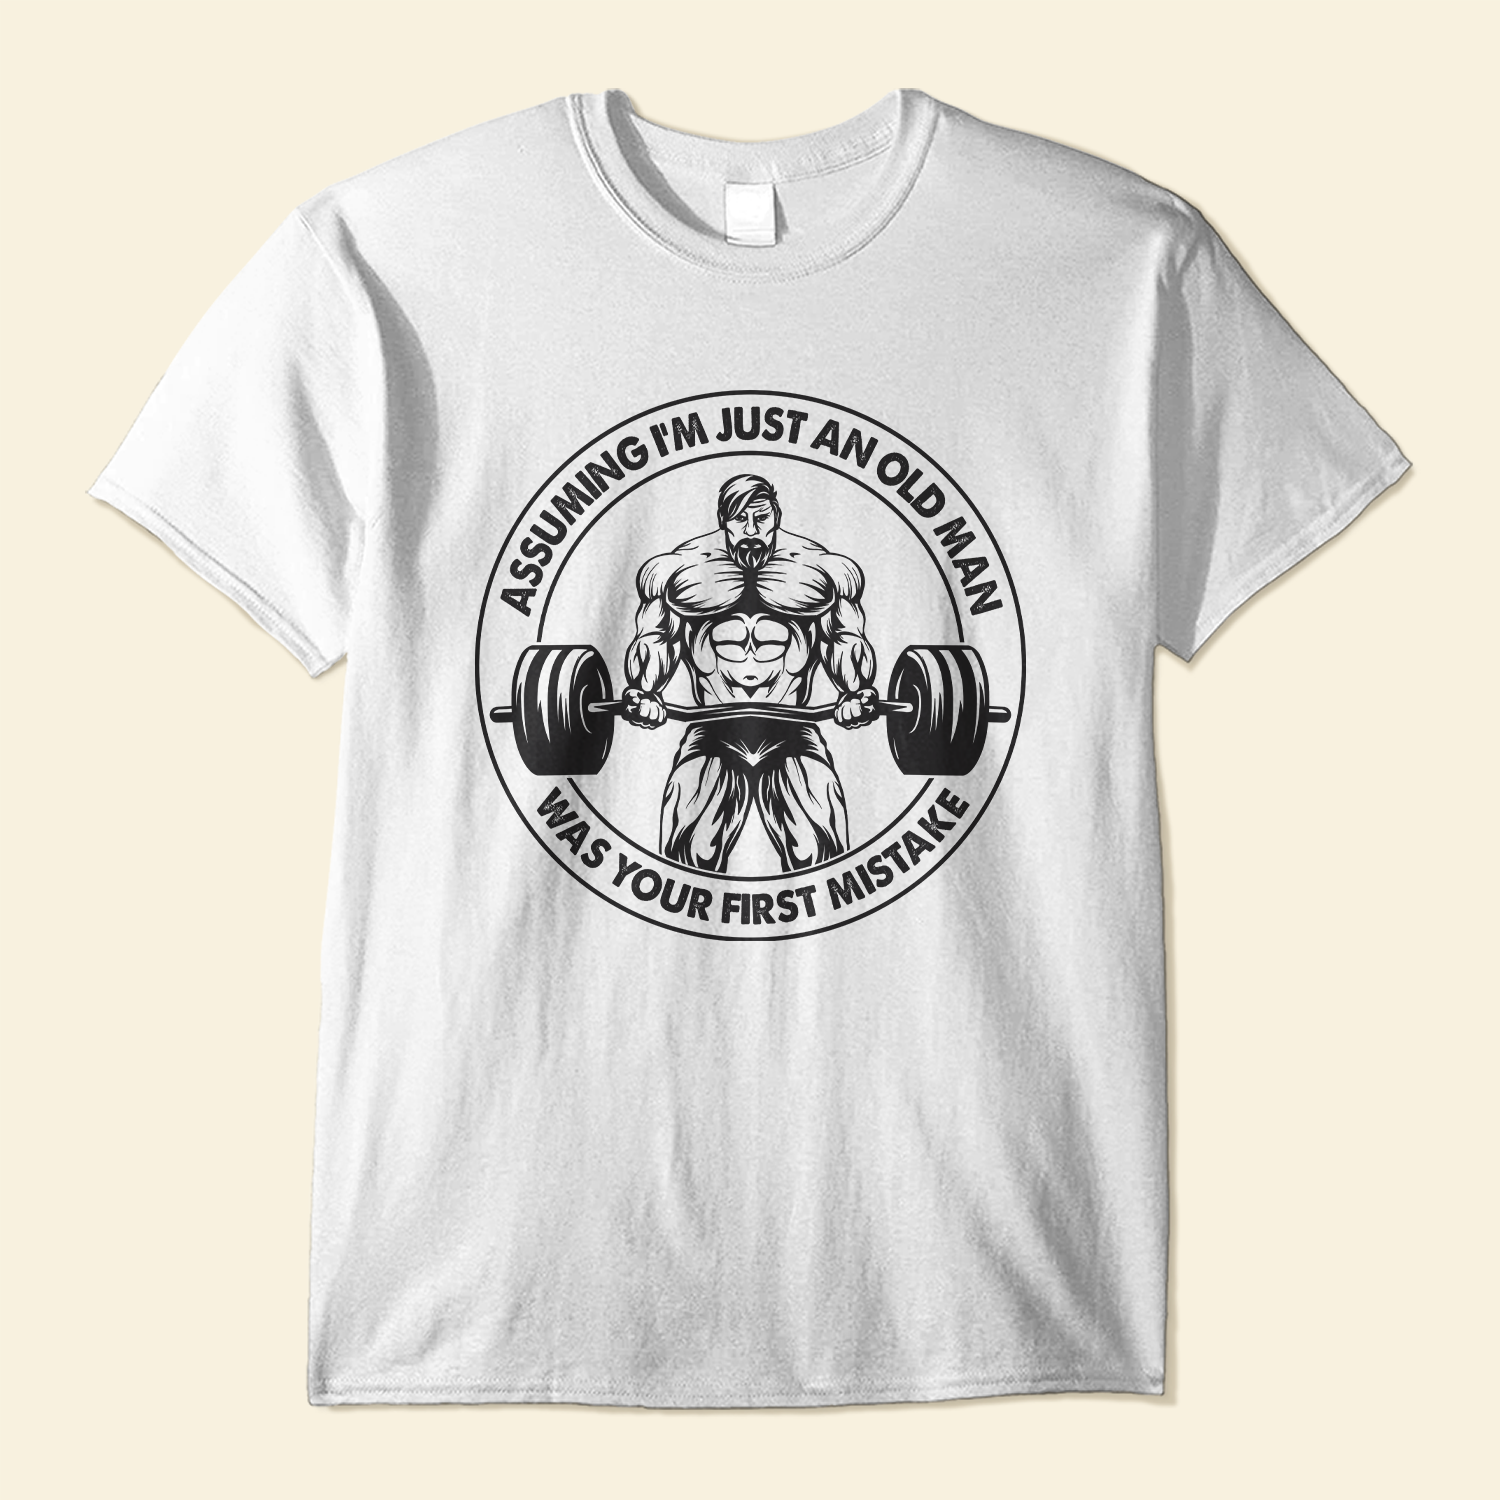 Assuming I'm Just An Old Man - Personalized Shirt - Birthday Gift For Gymer